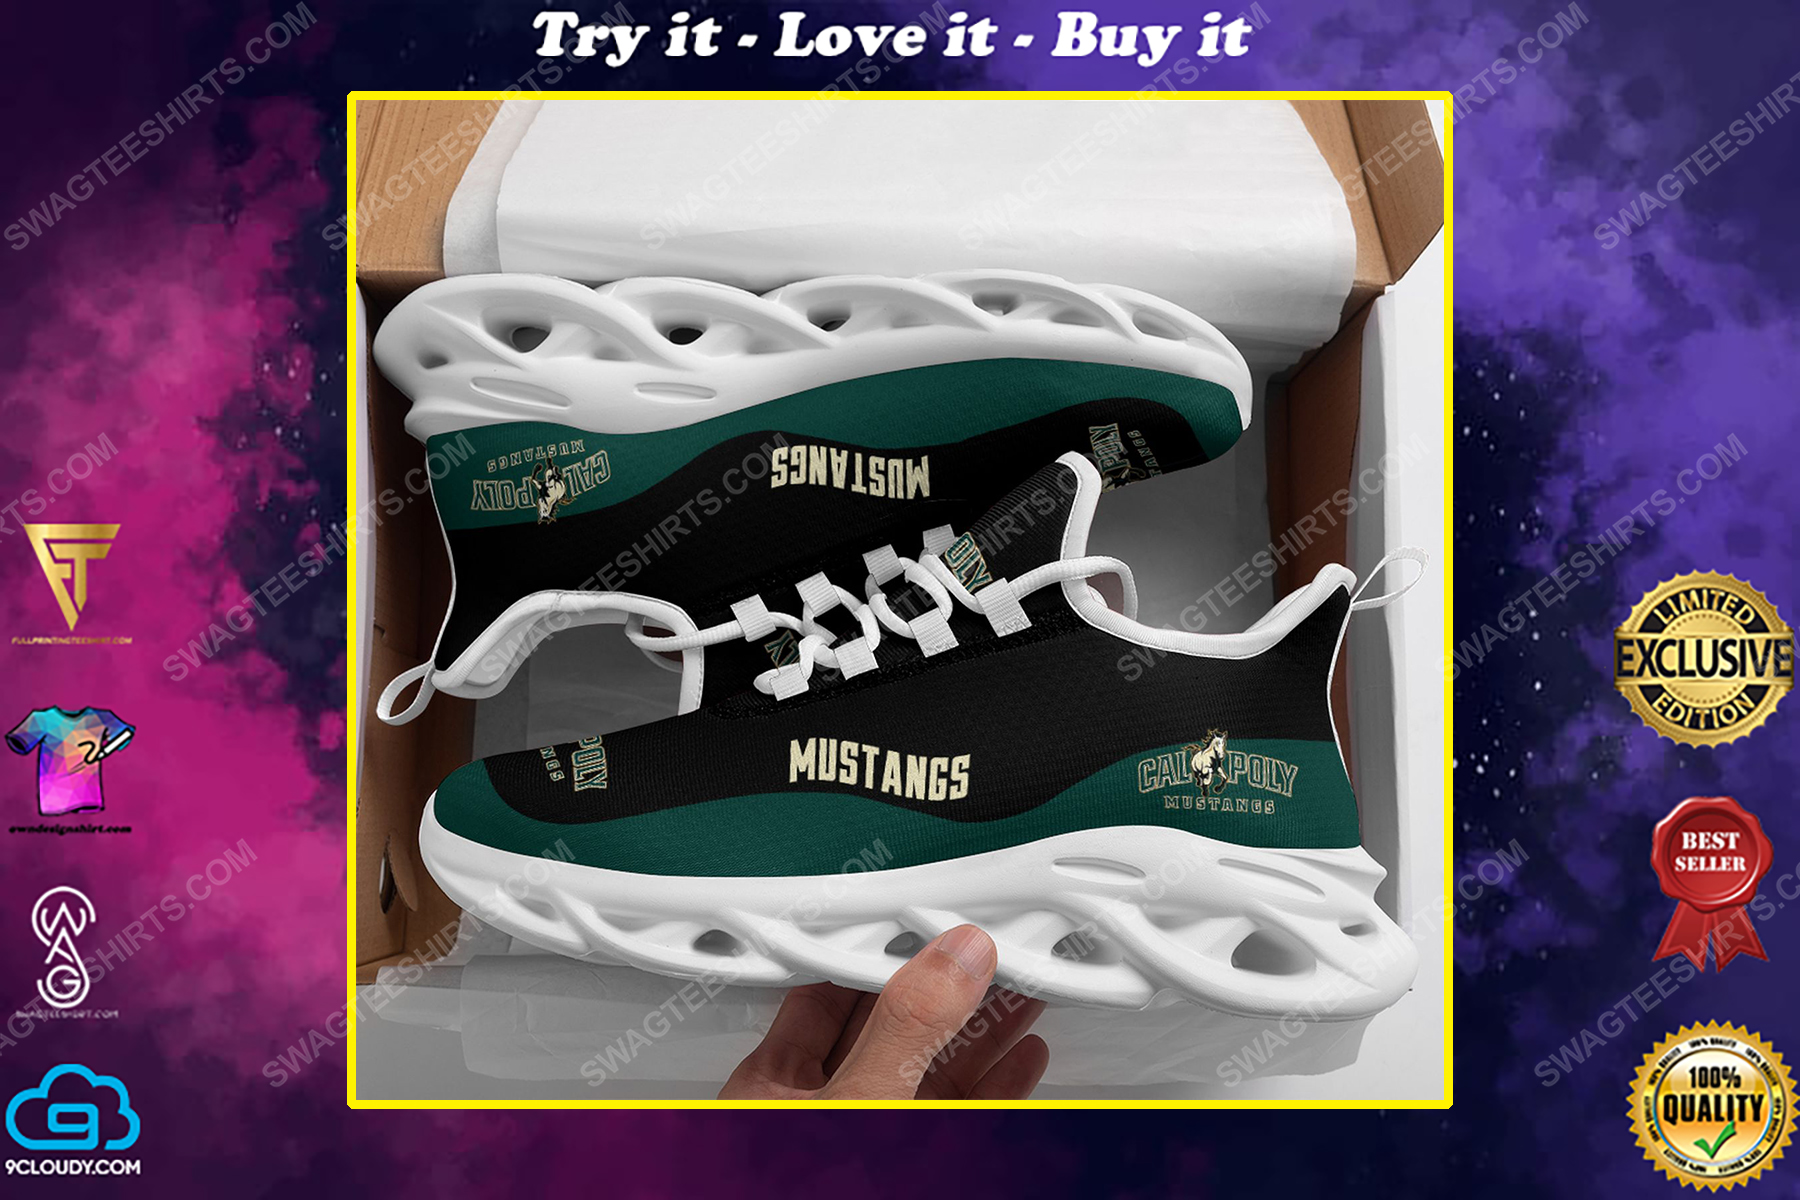 The cal poly mustangs football team max soul shoes